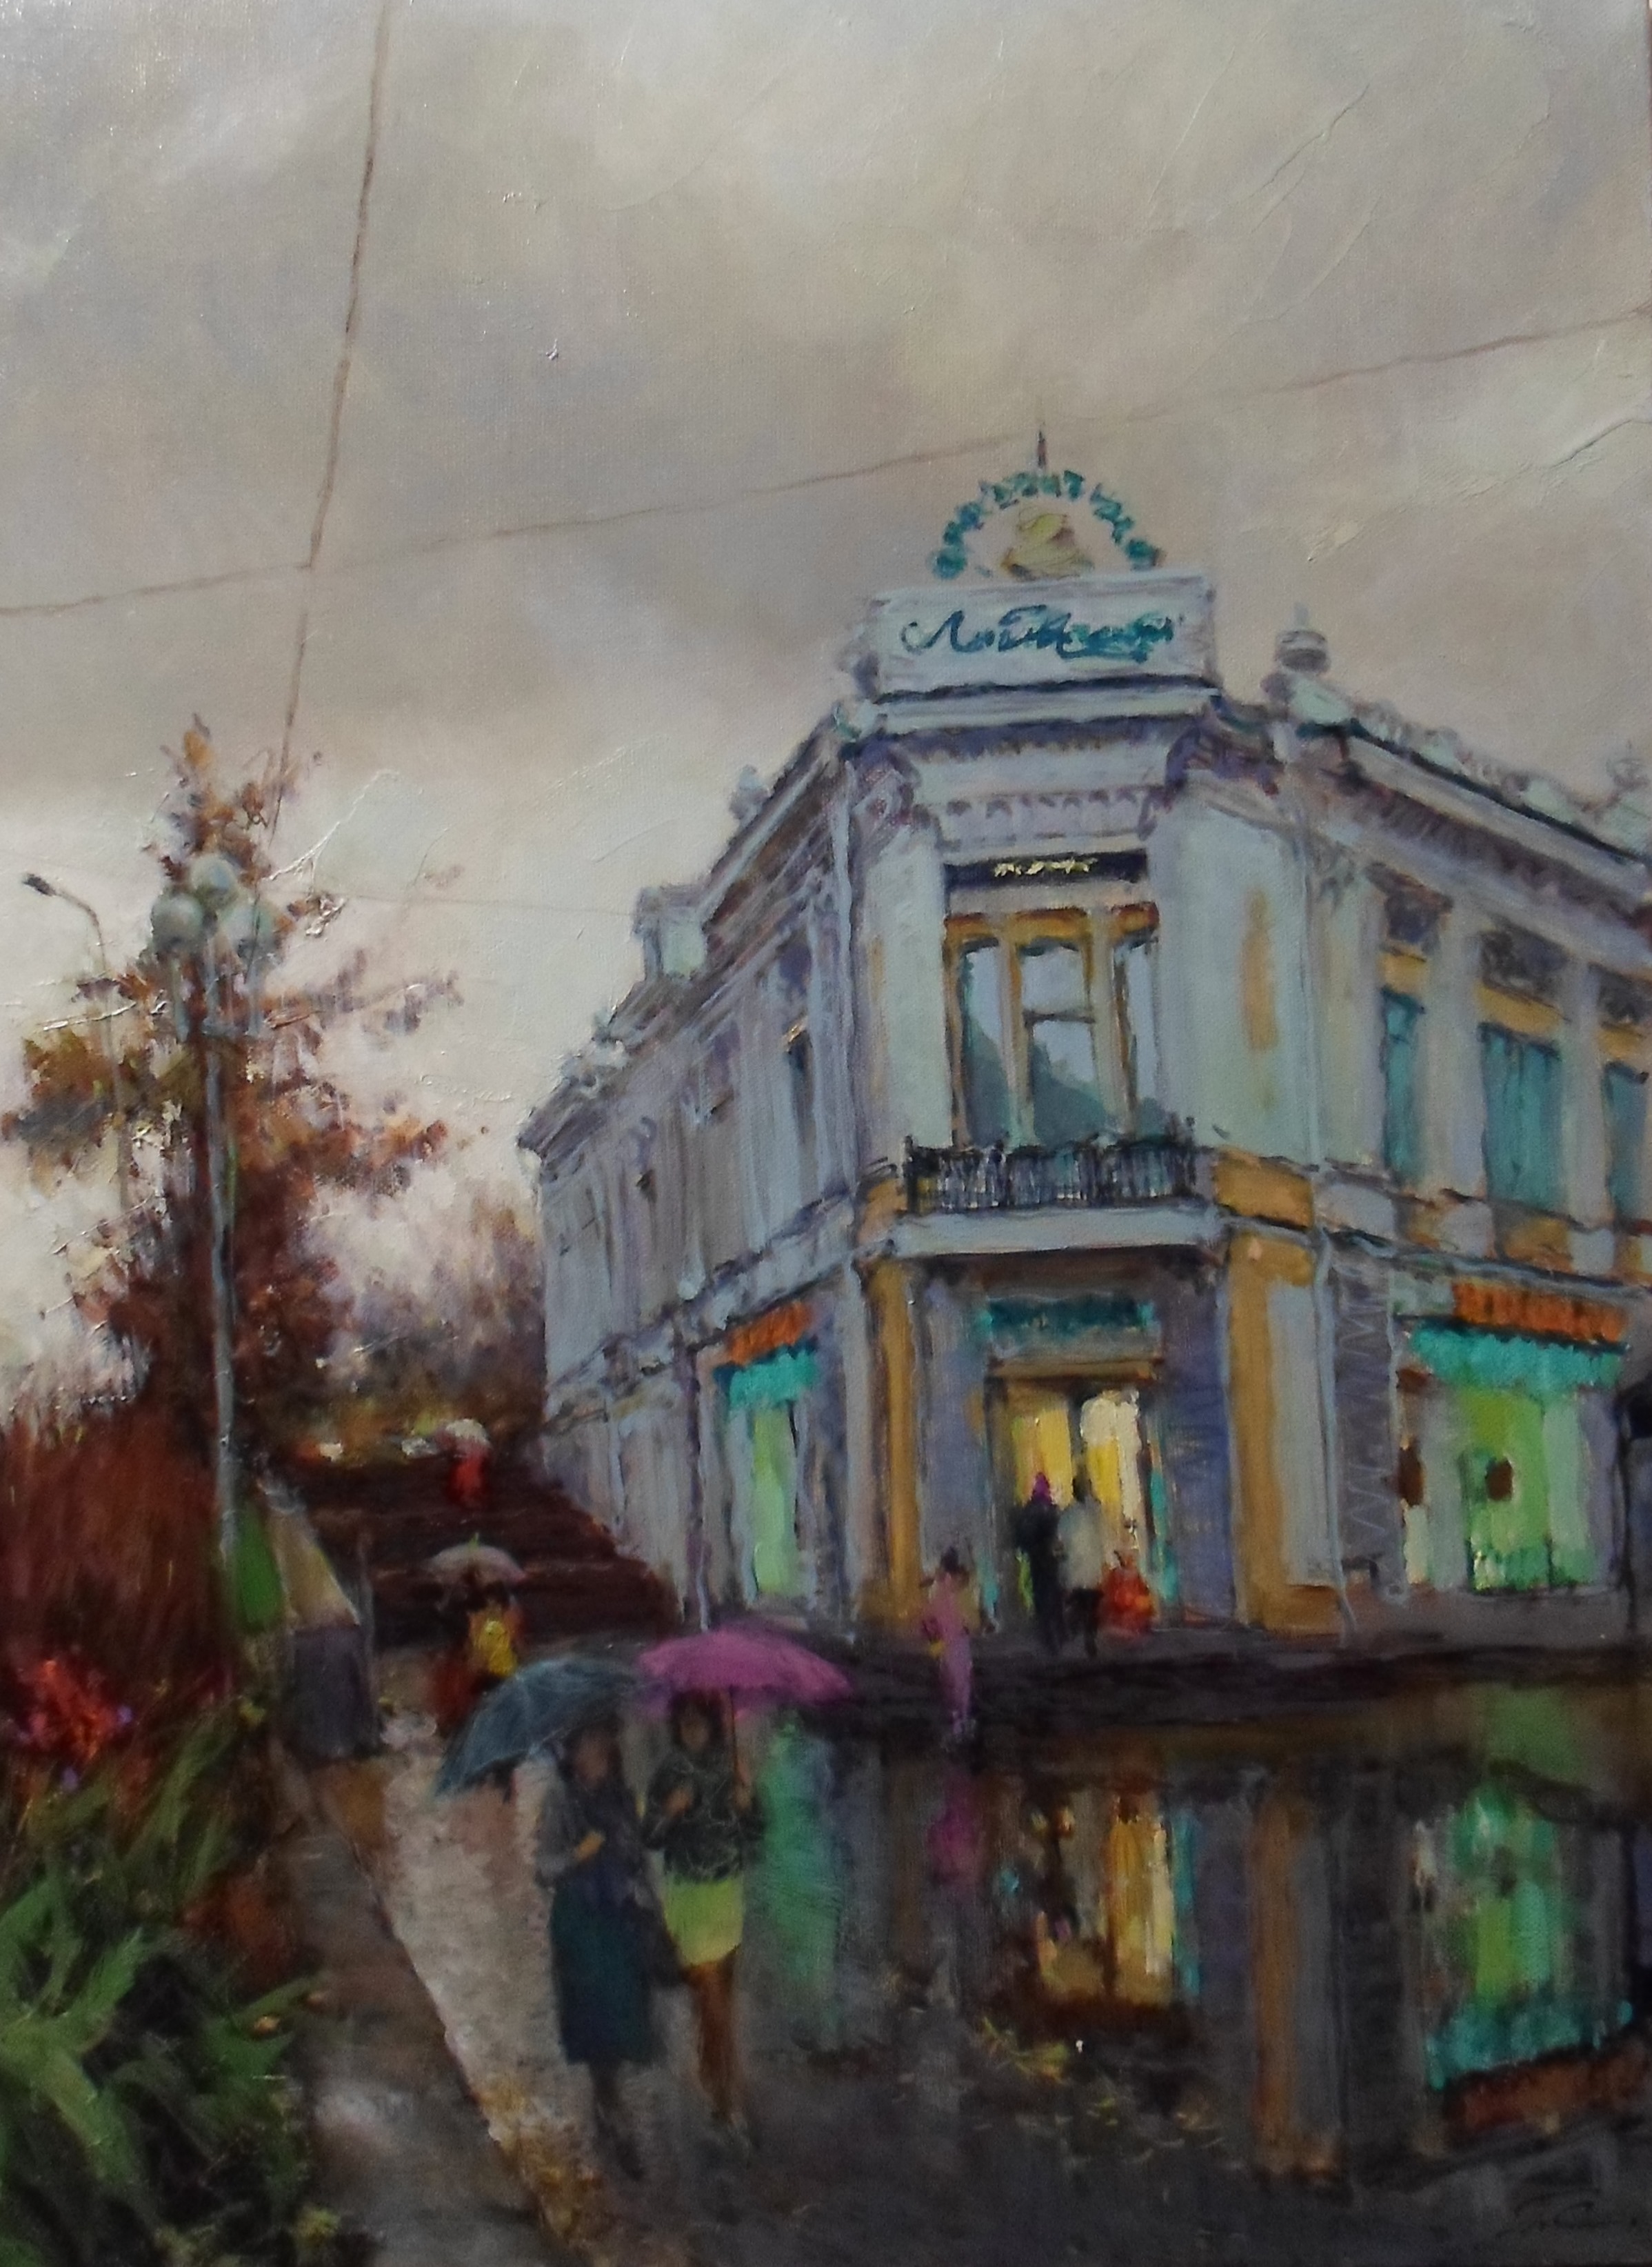 Lublinsky after Rain - 1, Sergei Prokhorov, Buy the painting Oil